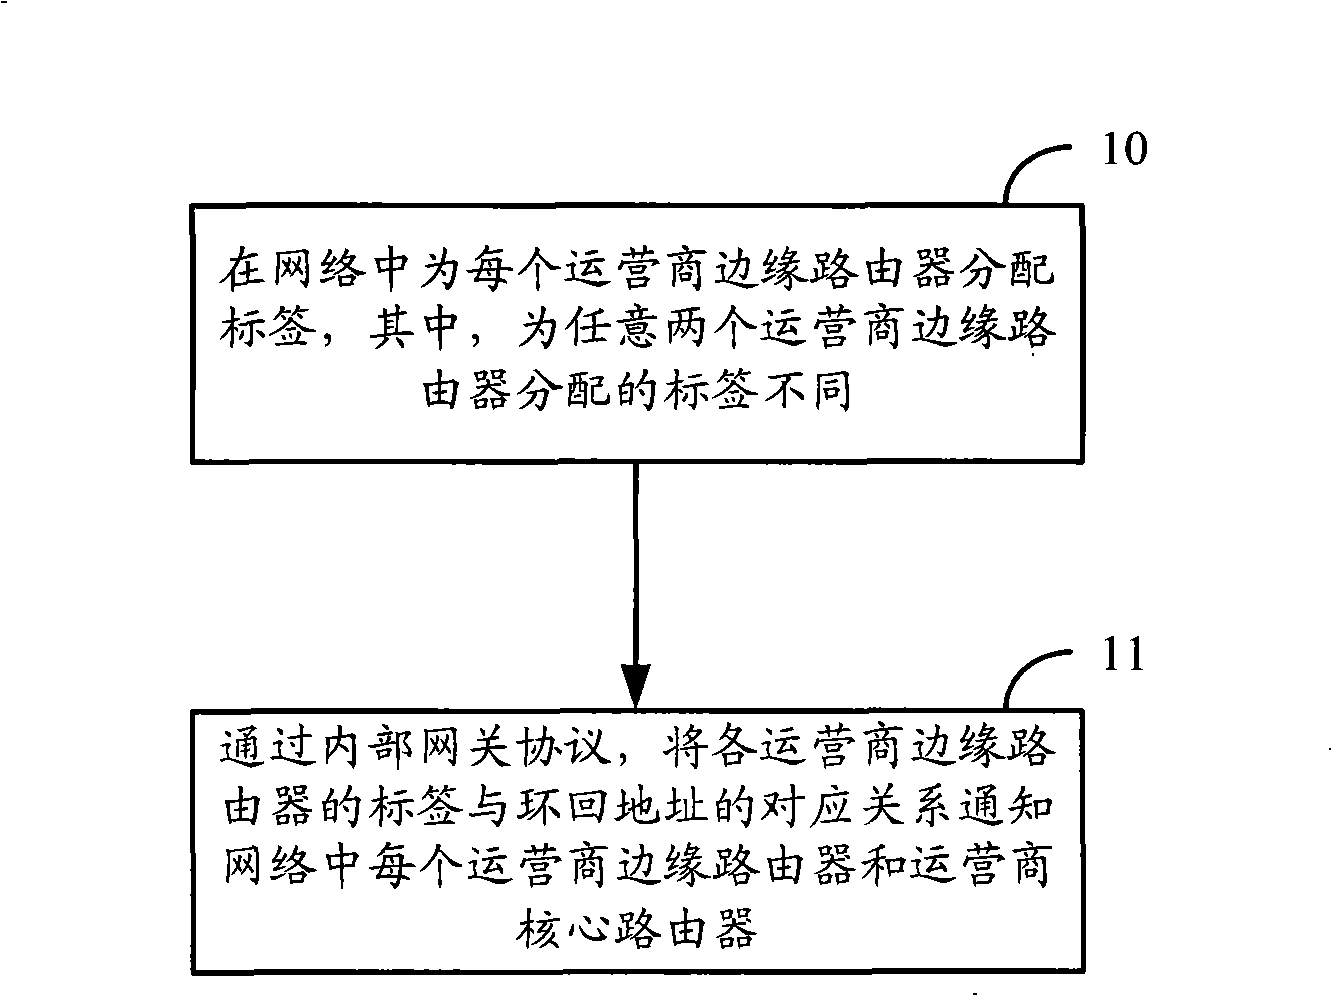 Method and apparatus for distributing label